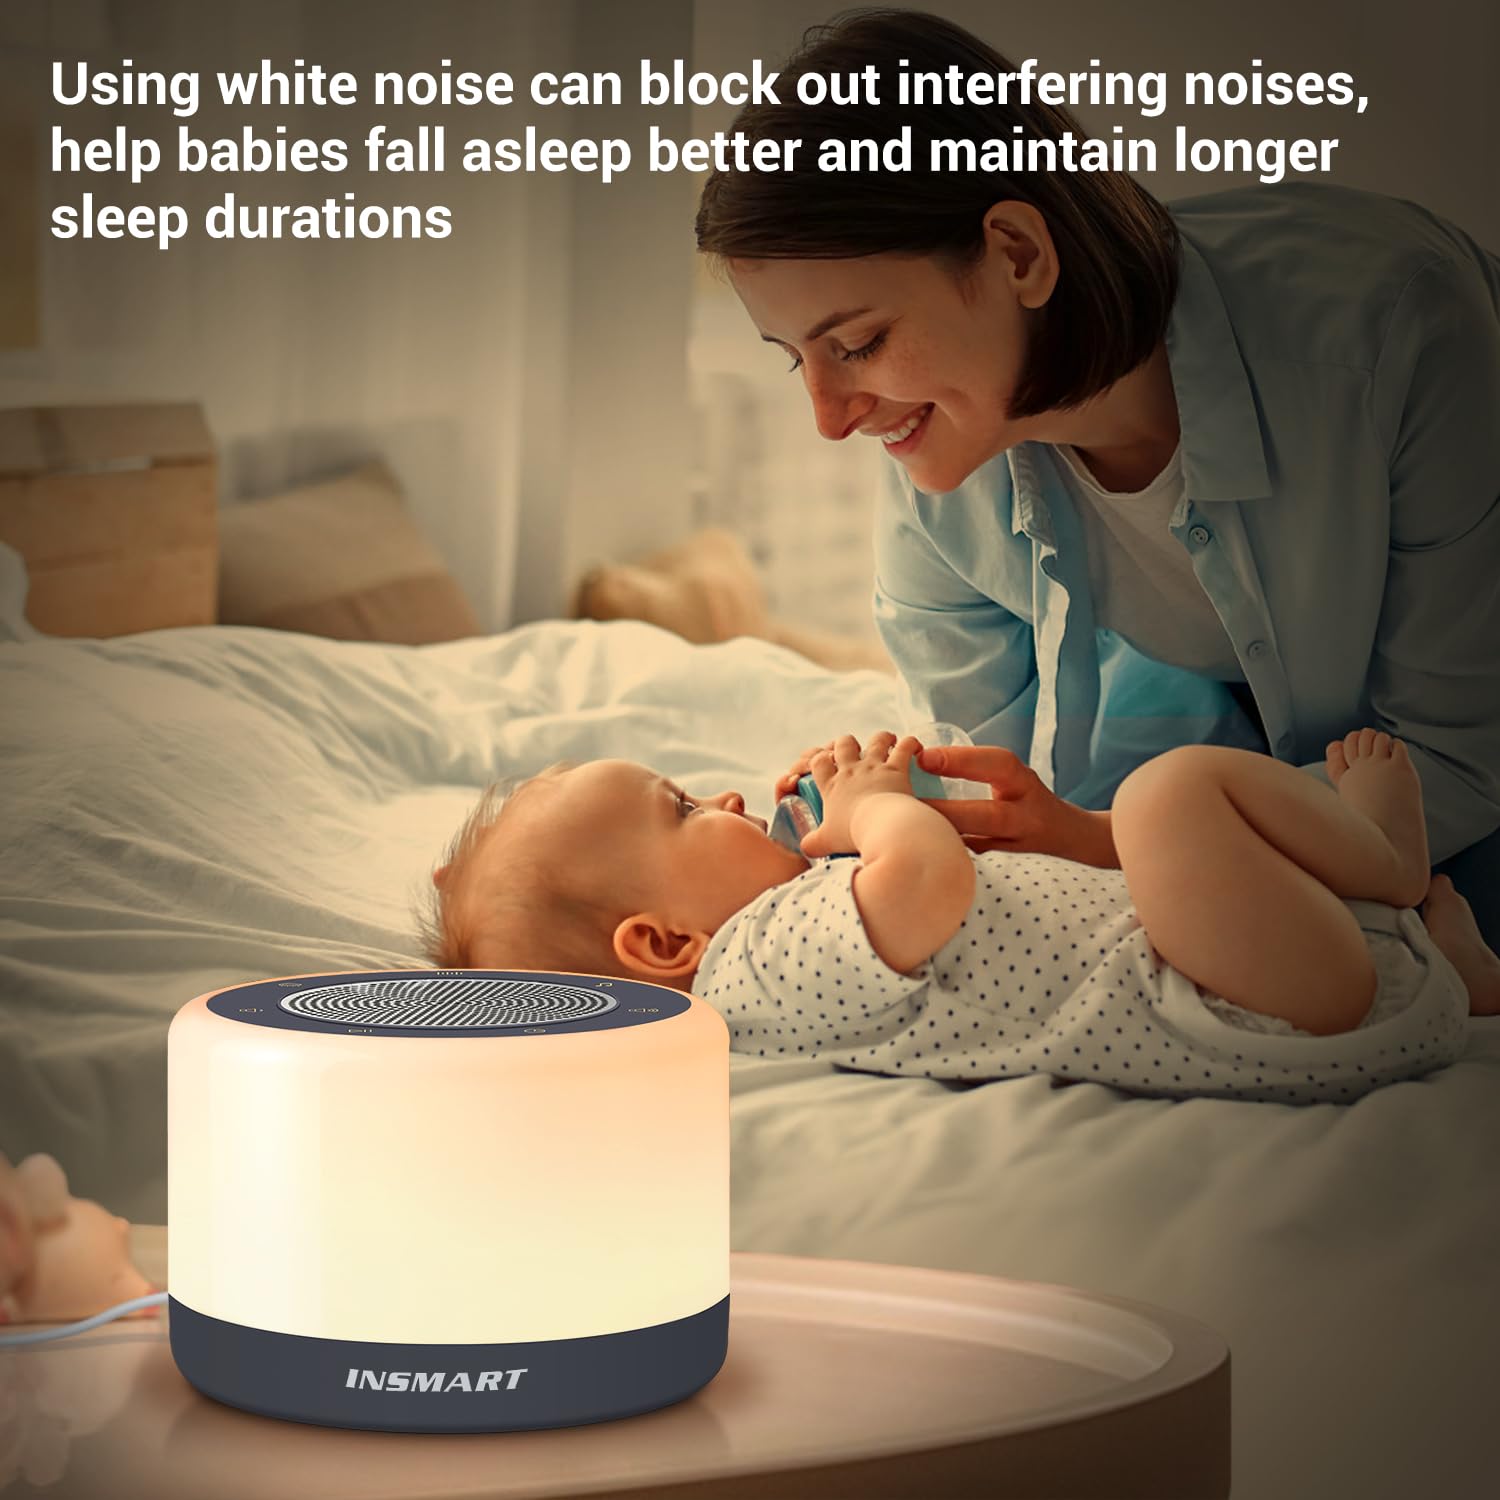 INSMART White Noise Machine, Sleep Aid Sound Machine with 8 Colors Night Lights for Baby Kid Adult, 32 Soothing Sounds 5 Timer Memory Function Full Touch Metal Grille for Office Travel Gift, Plug in